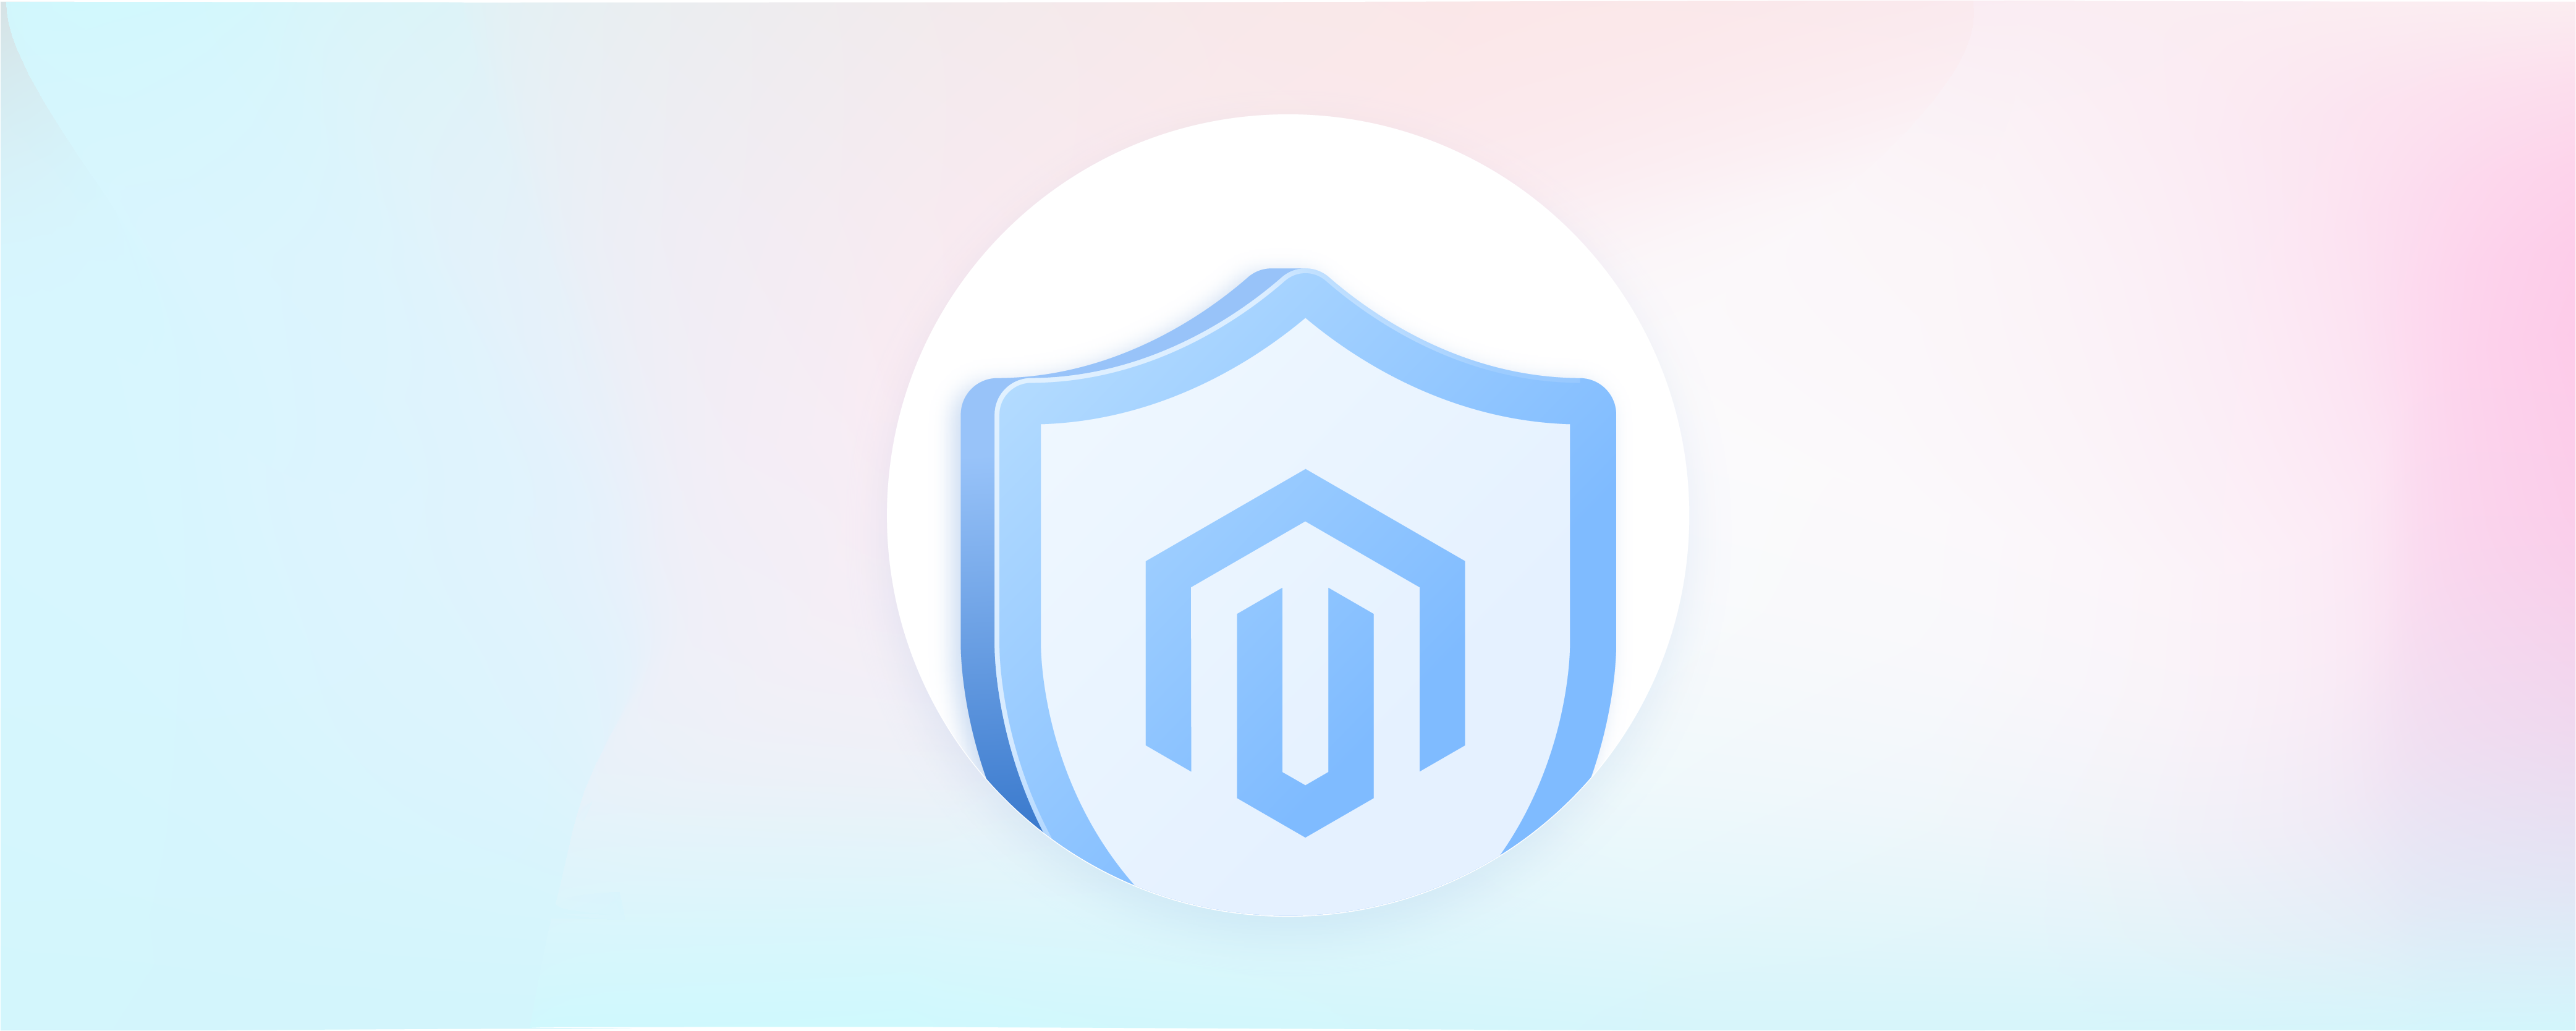 9 Magento Security Best Practices to Protect Your E-commerce Store